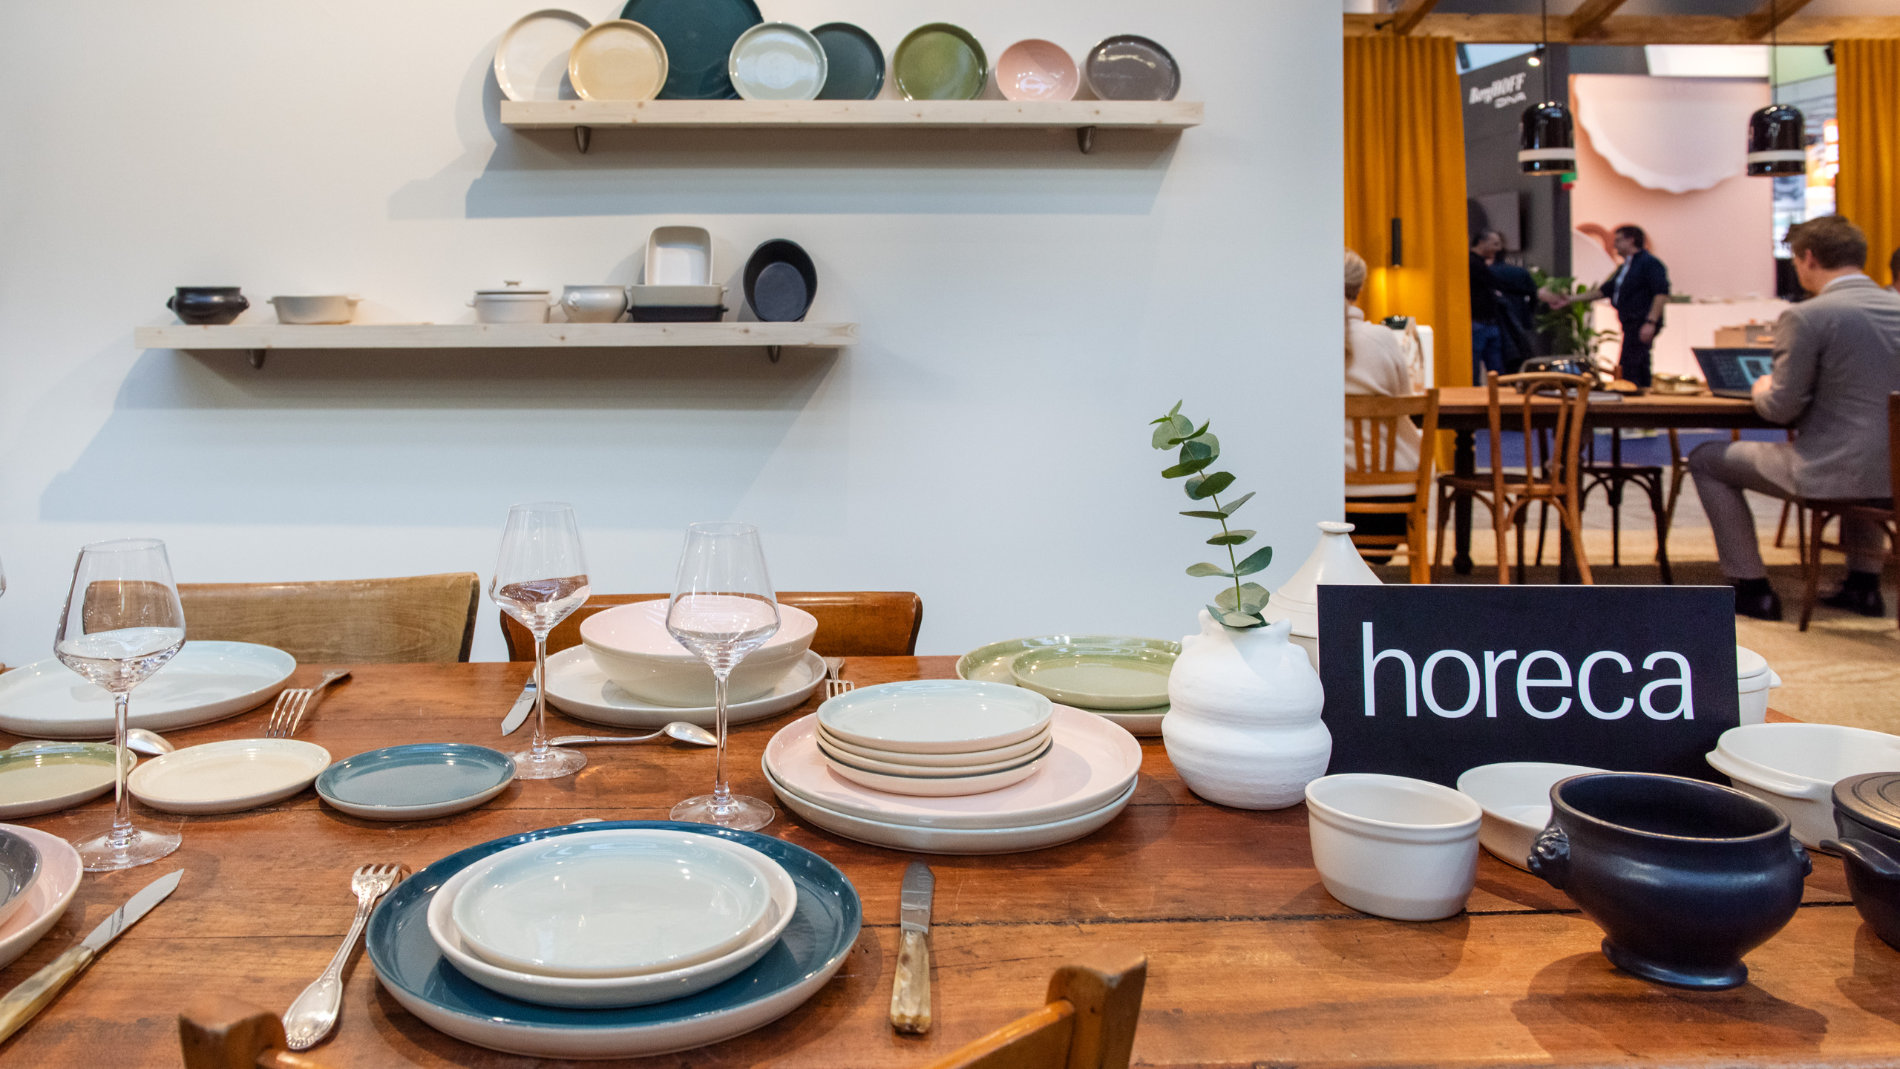 Tableware with HoReCa sign at Ambiente